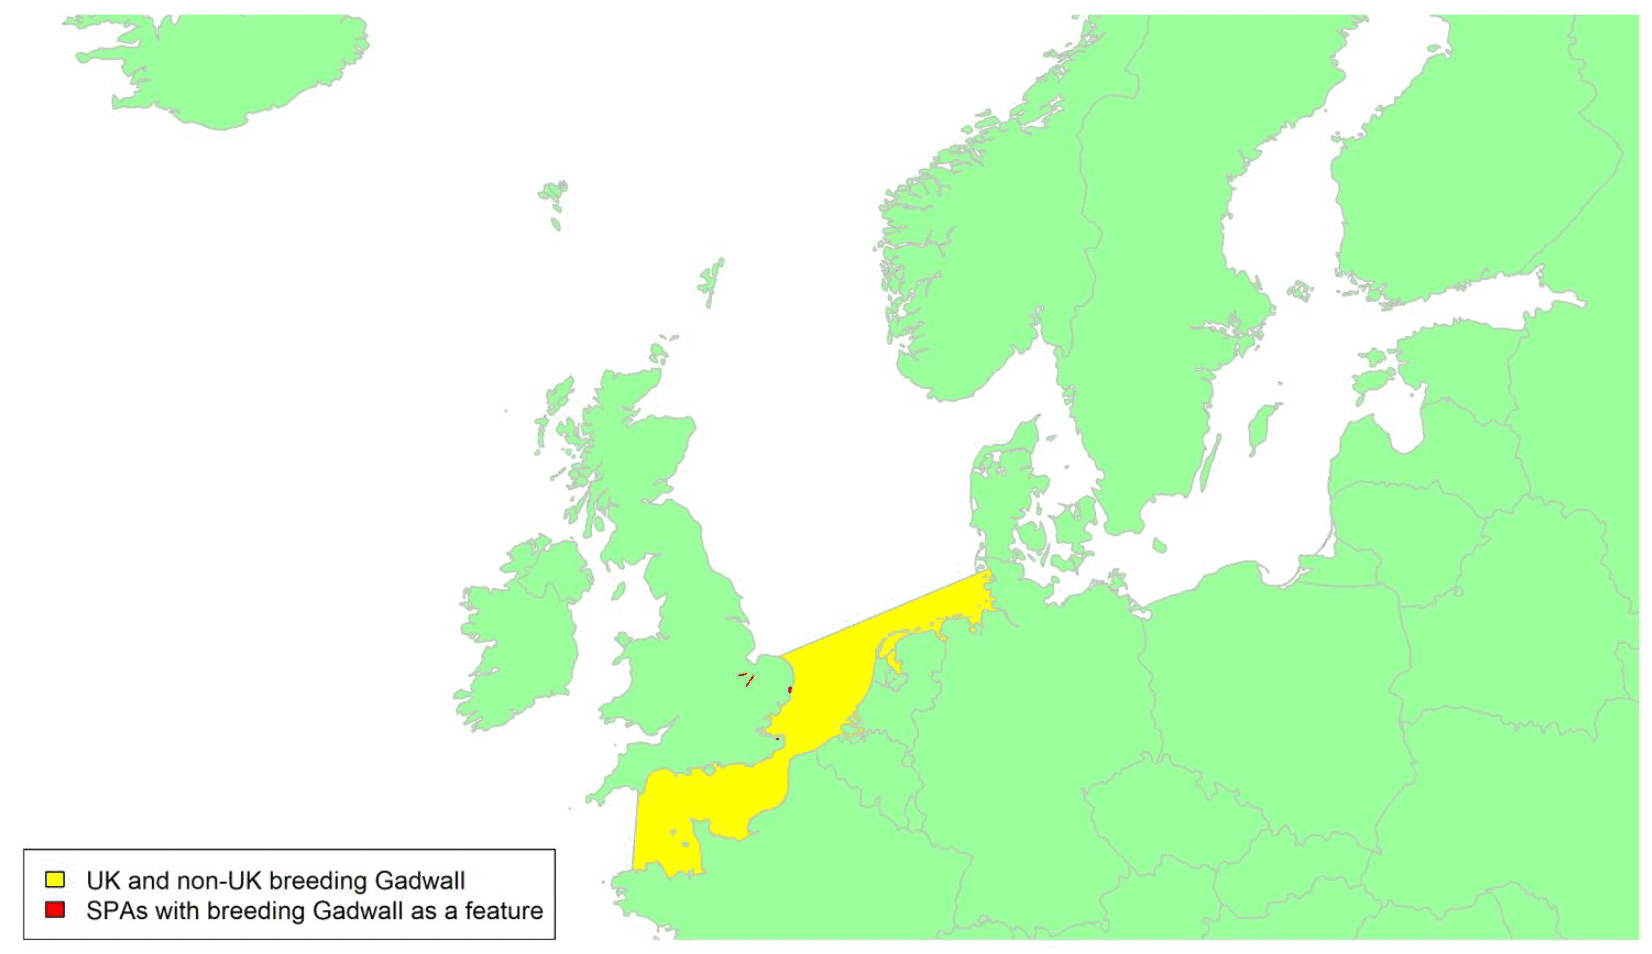 Map of North West Europe showing migratory routes and SPAs within the UK for breeding Gadwall as described in the text below.